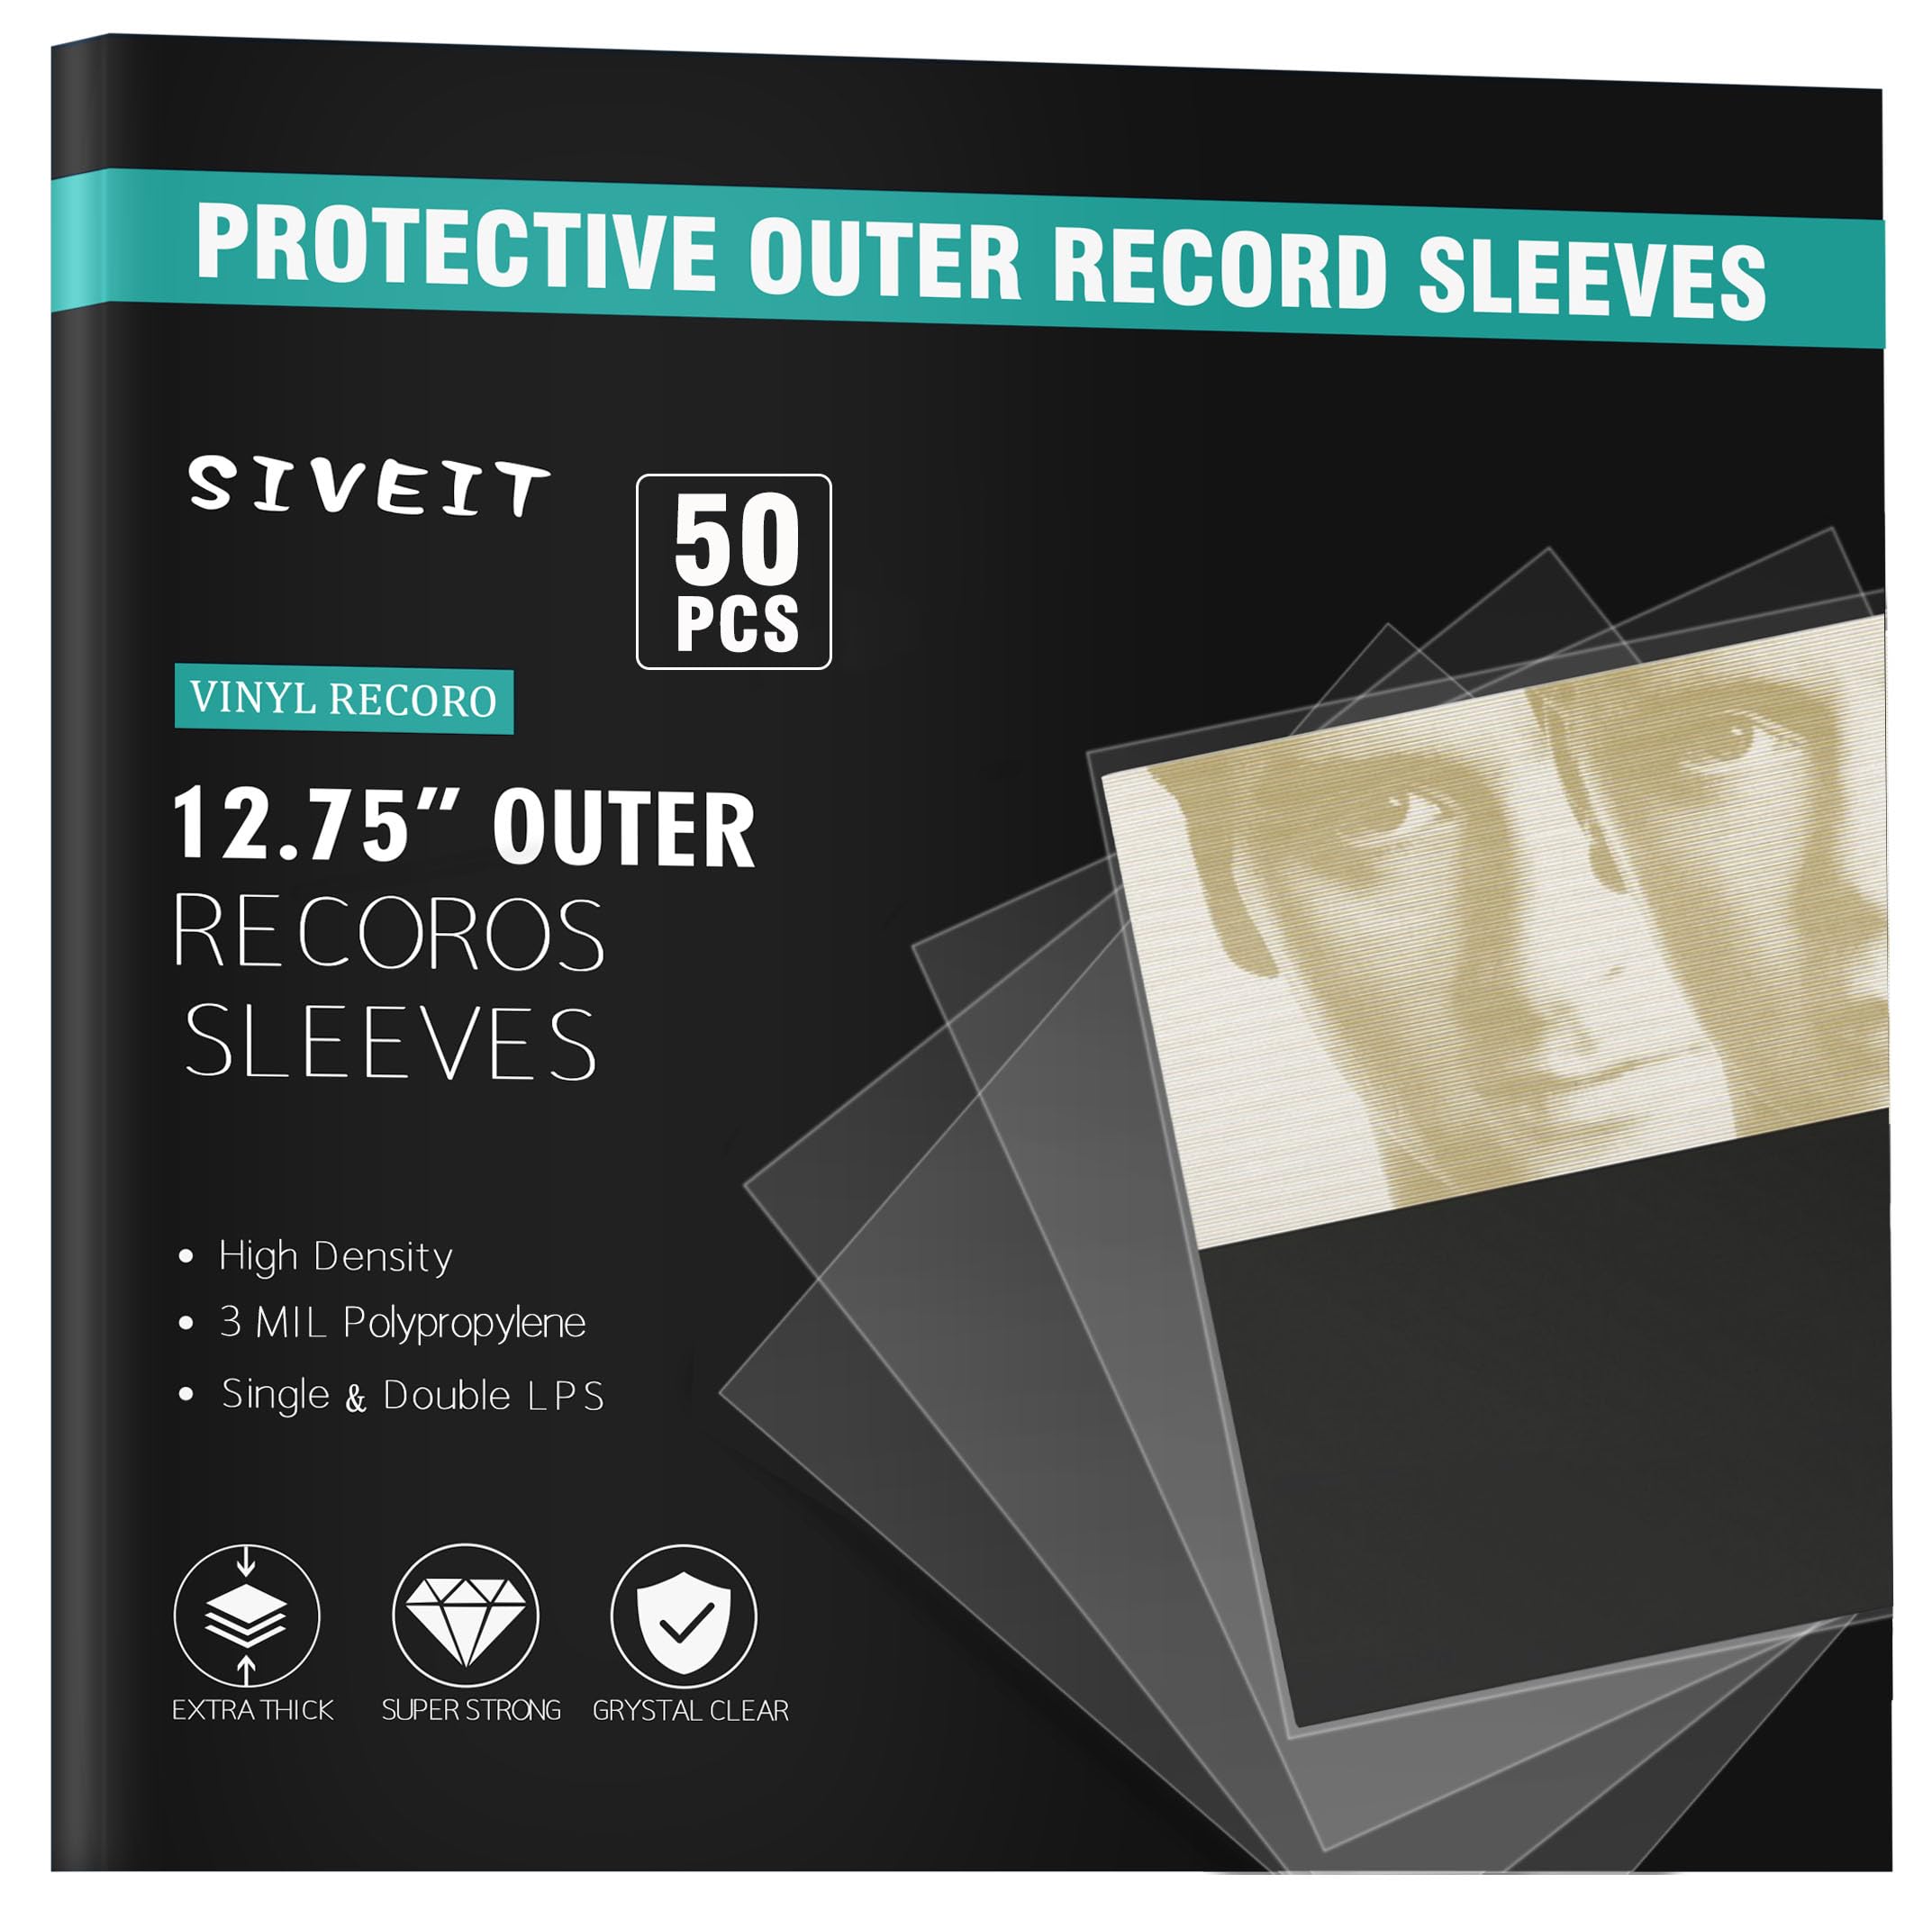 Siveit Record Sleeves for Vinyl Record-50 Clear Plastic Protective Vinyl Record Outer Sleeves 3 Mil No-Acid -12.75" x 12.5" Record Sleeves Outer for 12" Single and Double LP Album Covers